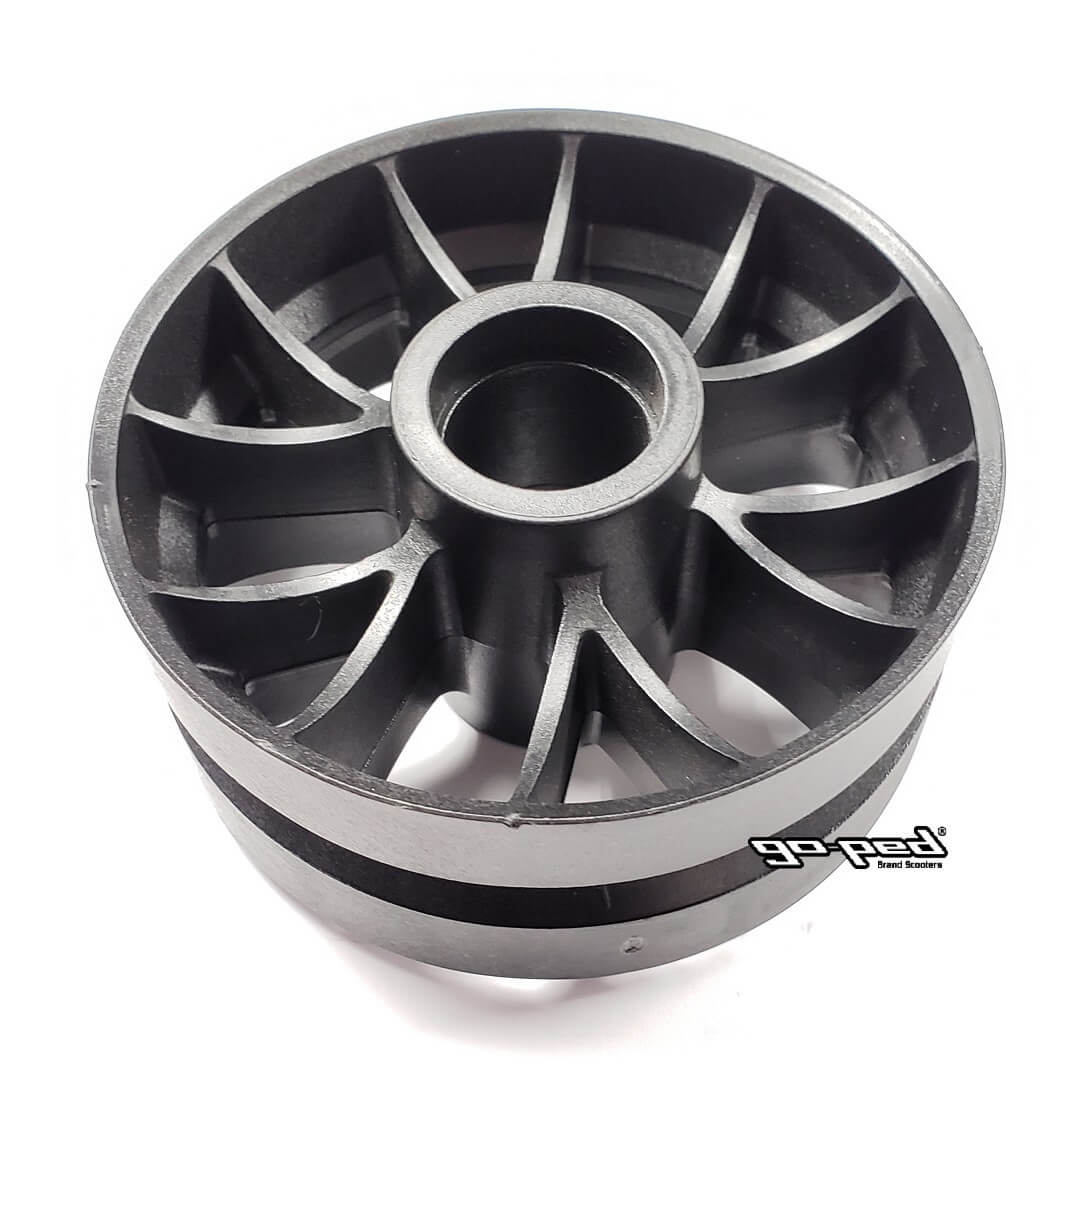 Go-Ped HUB, MACH 12 WHEEL (1158H) for Scooters